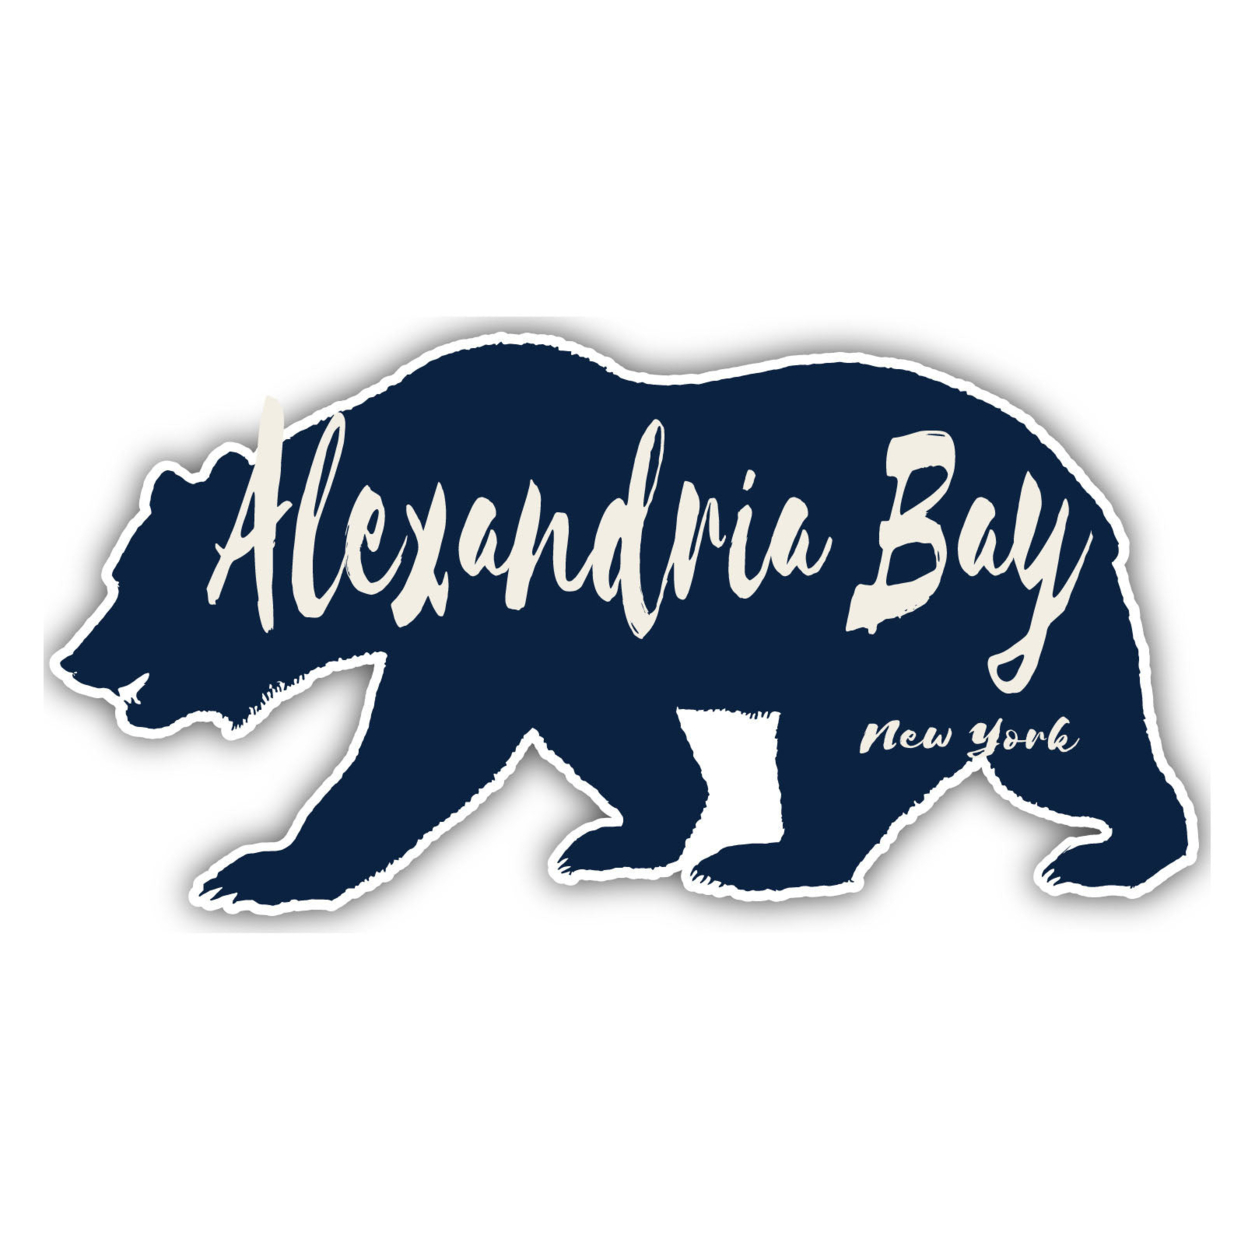 Alexandria Bay New York Souvenir Decorative Stickers (Choose Theme And Size) - 4-Pack, 12-Inch, Adventures Awaits